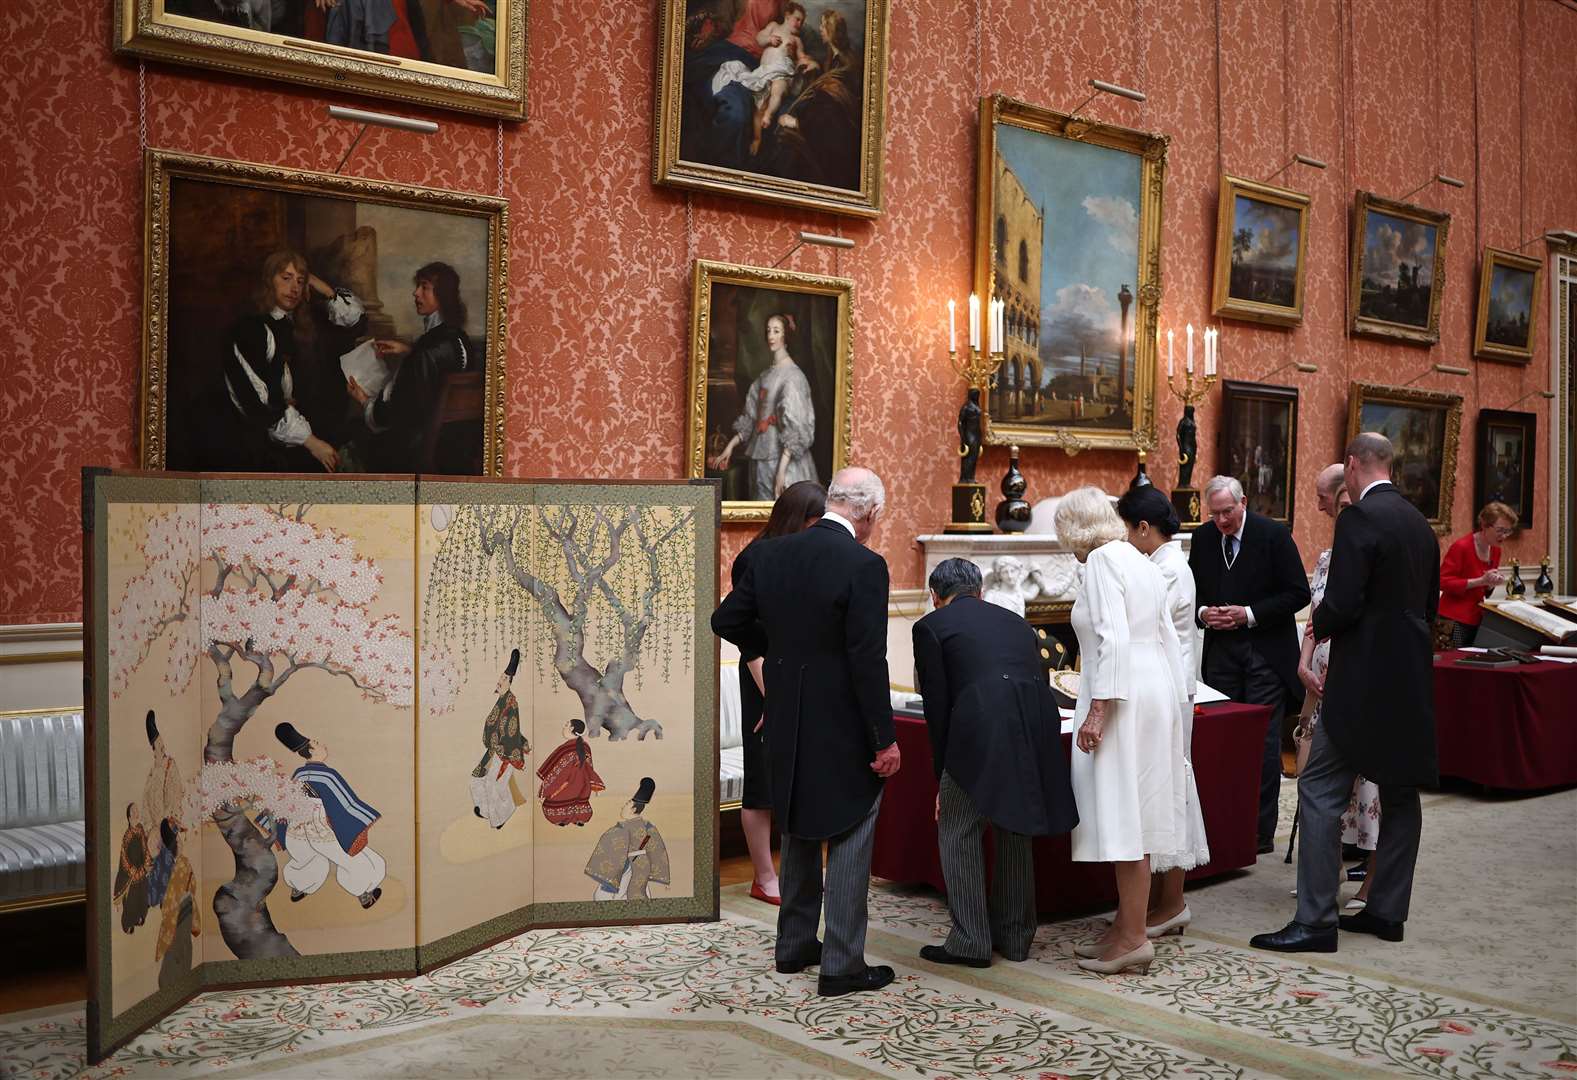 The King and Queen with Emperor Naruhito and his wife Empress Masako view a display of Japanese items from the royal collection at Buckingham Palace (Henry Nicholls/PA)